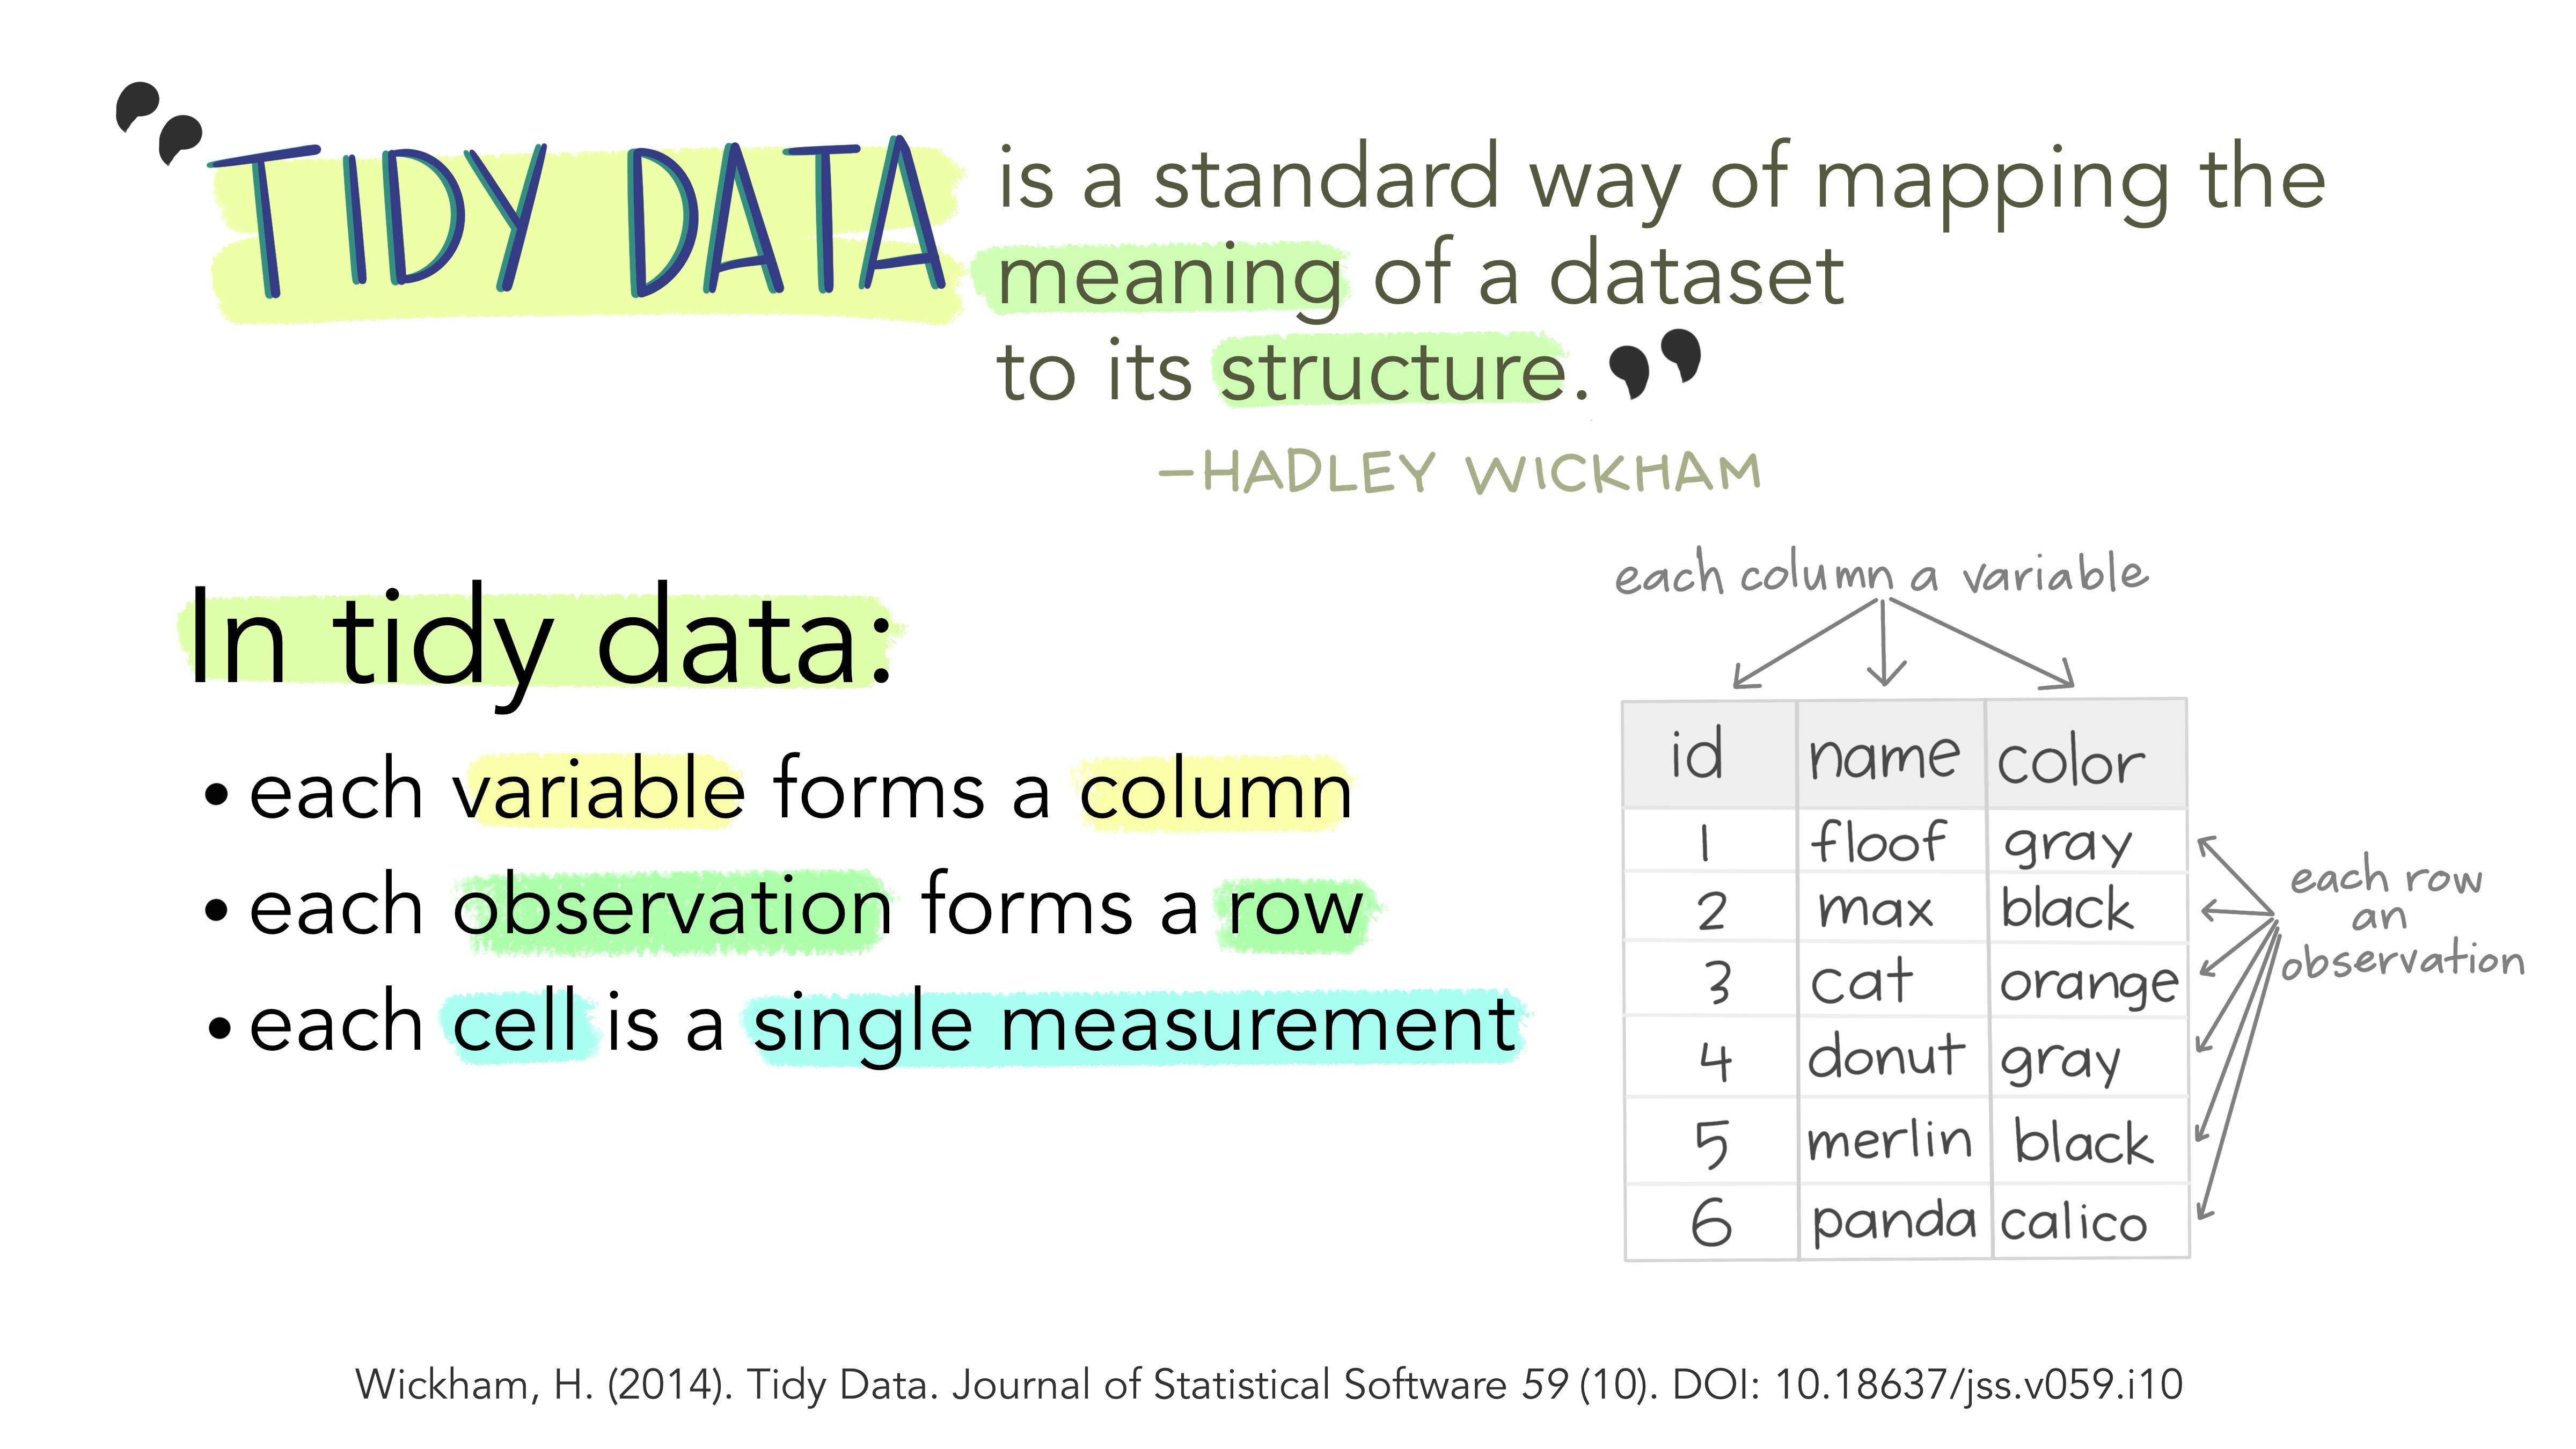 Tidy data is a standard way of mapping the meaning of a dataset to its structure, according to Hadley Wickham. In tidy data, each variable forms a colum, each observation forms a row, each cell is a single measurement.